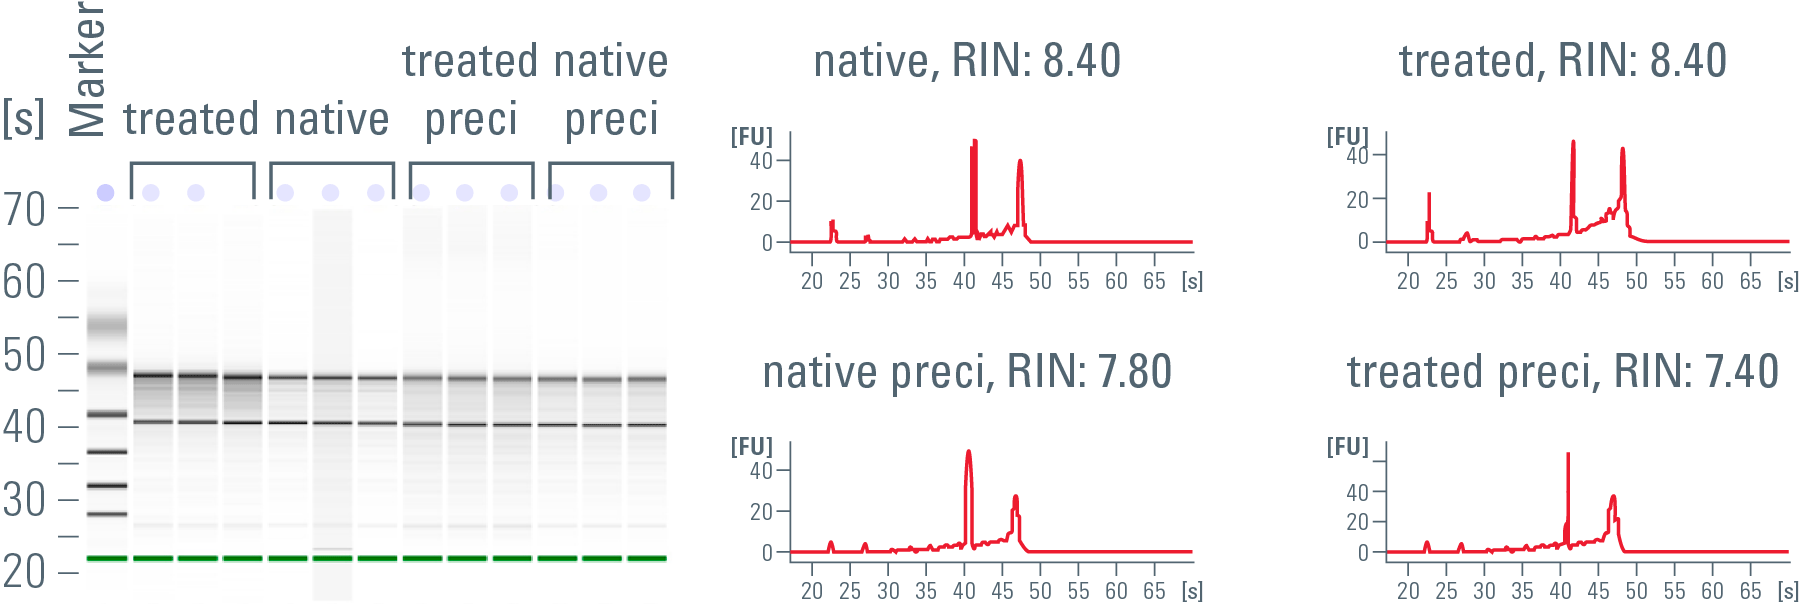 Comparison of the RNA quality of native, untreated as well as fixed and stained murine-brain sections